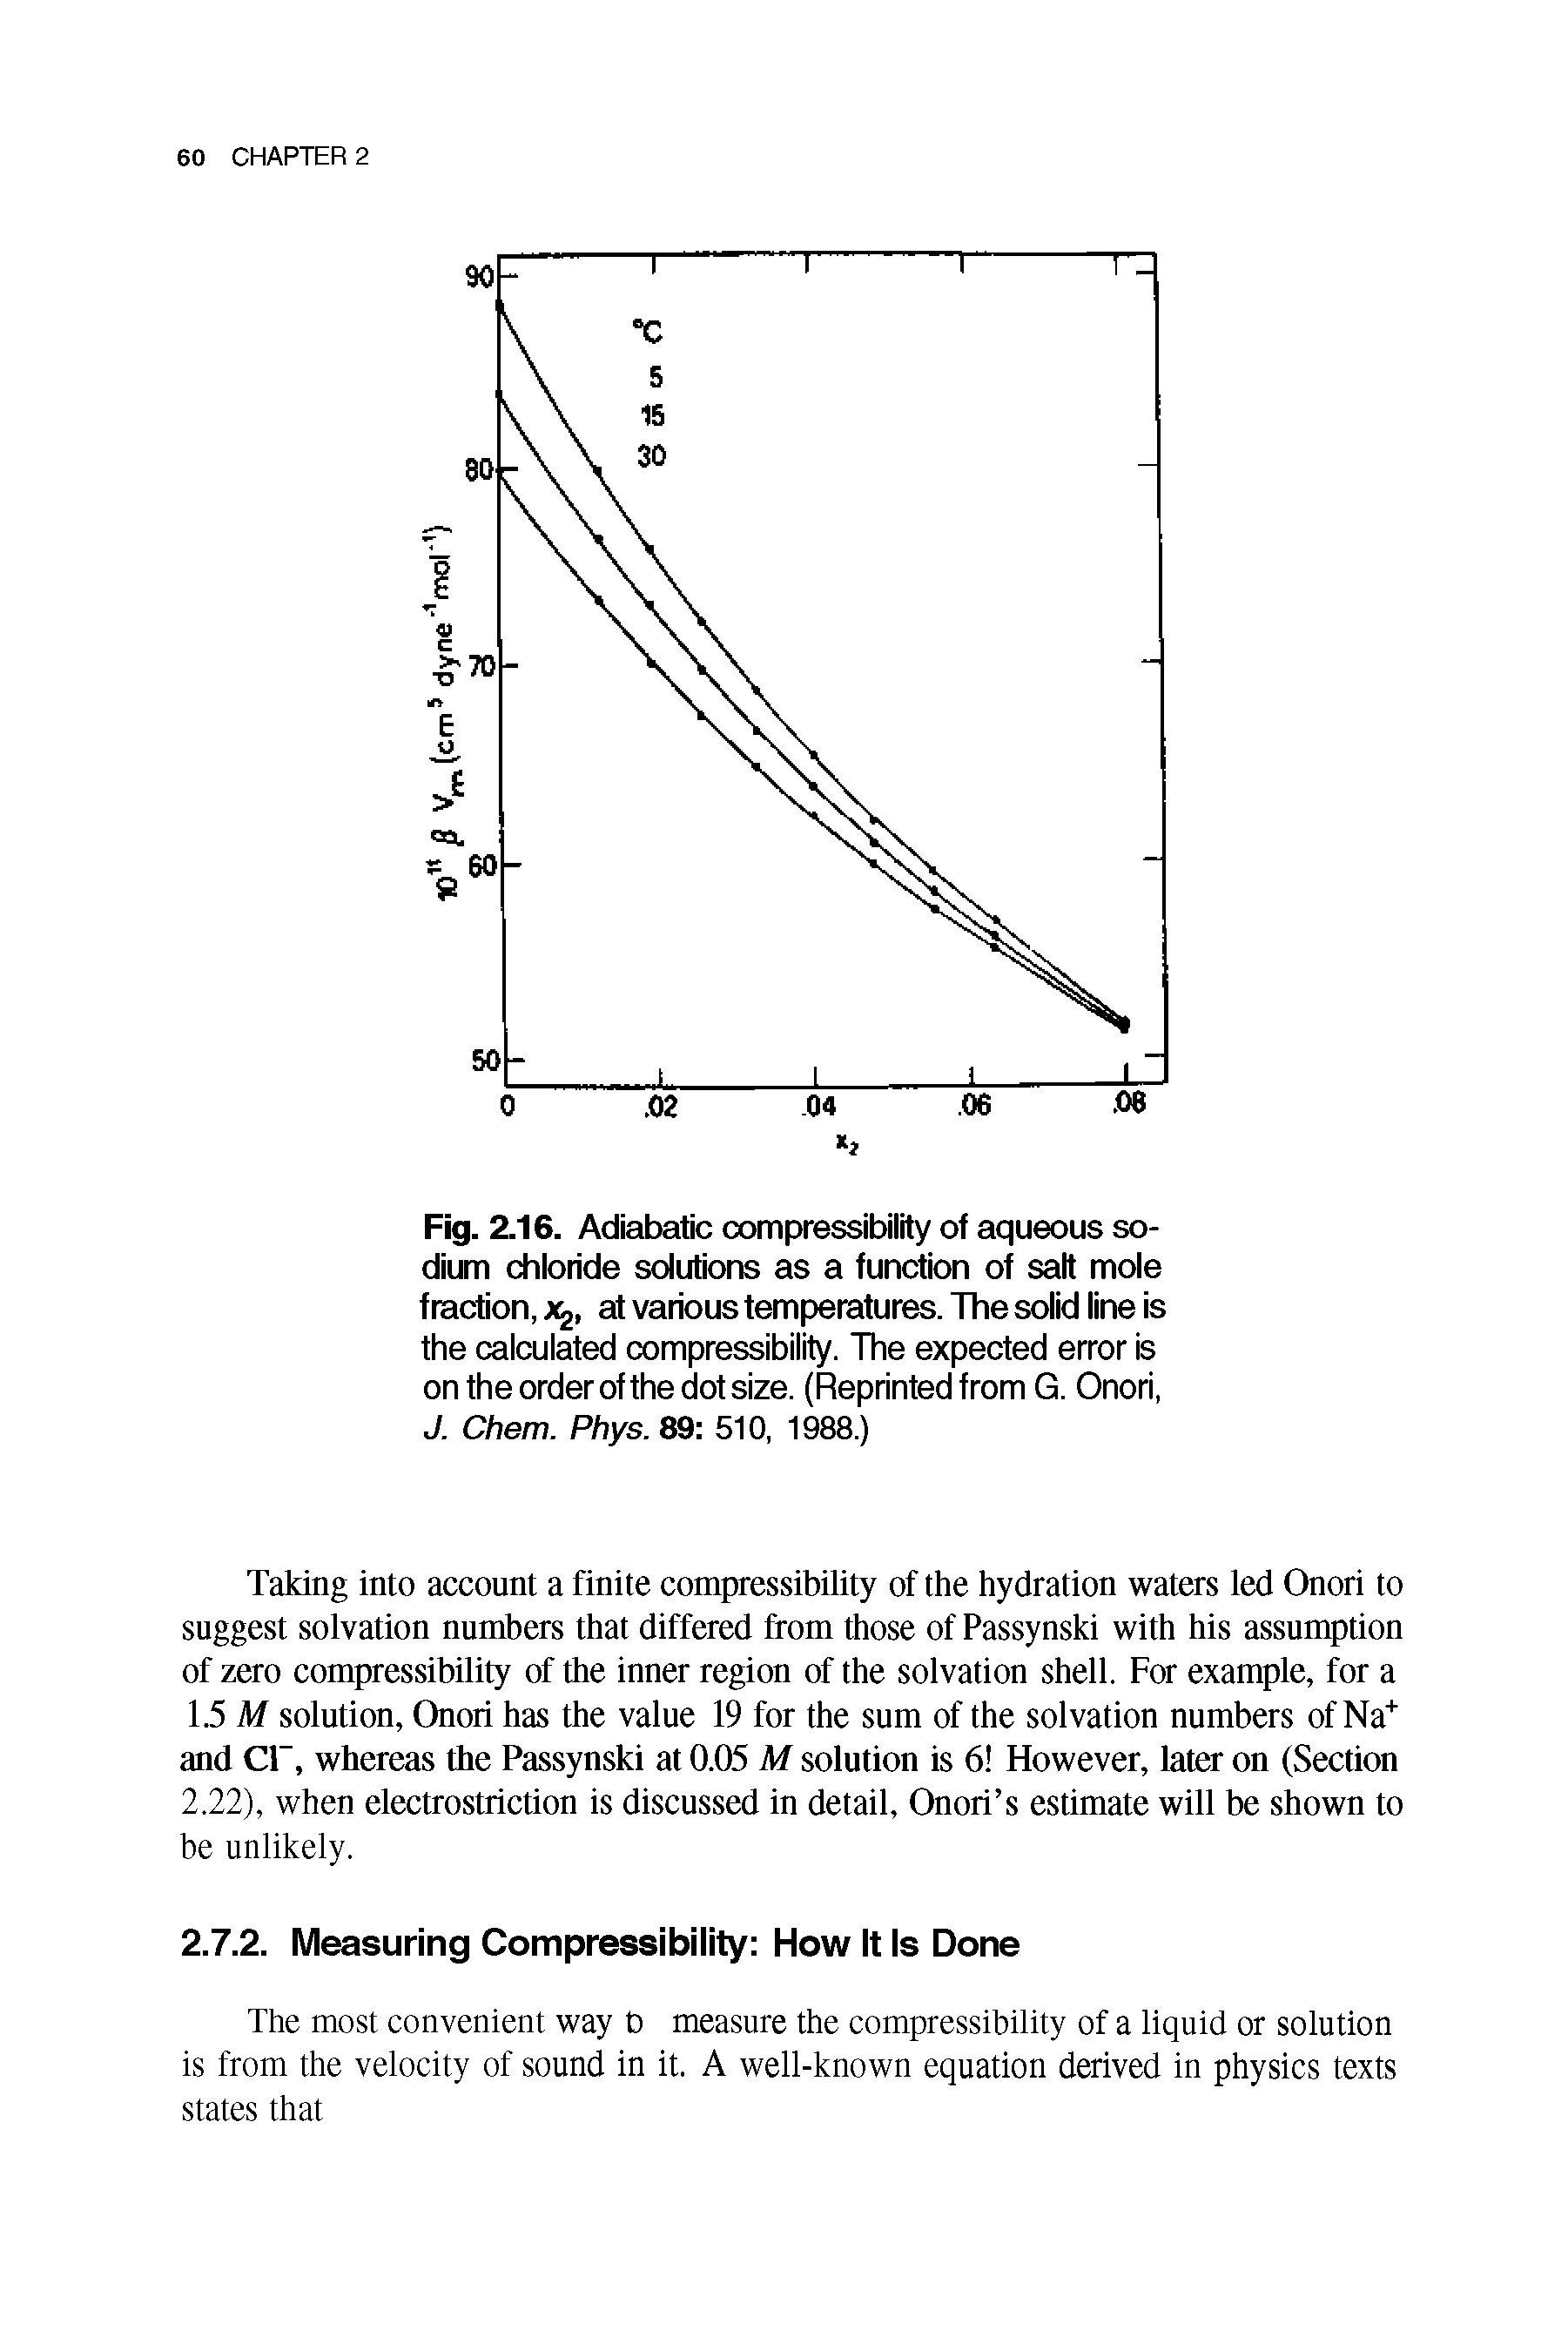 Fig. 2.16. Adiabatic compressibility of aqueous sodium chloride solutions as a function of salt mole fraction, at various temperatures. The solid line is the calculated compressibility. The expected error is on the order of the dot size. (Reprinted from G. Onori, J. Chem. Phys. 89 510, 1988.)...